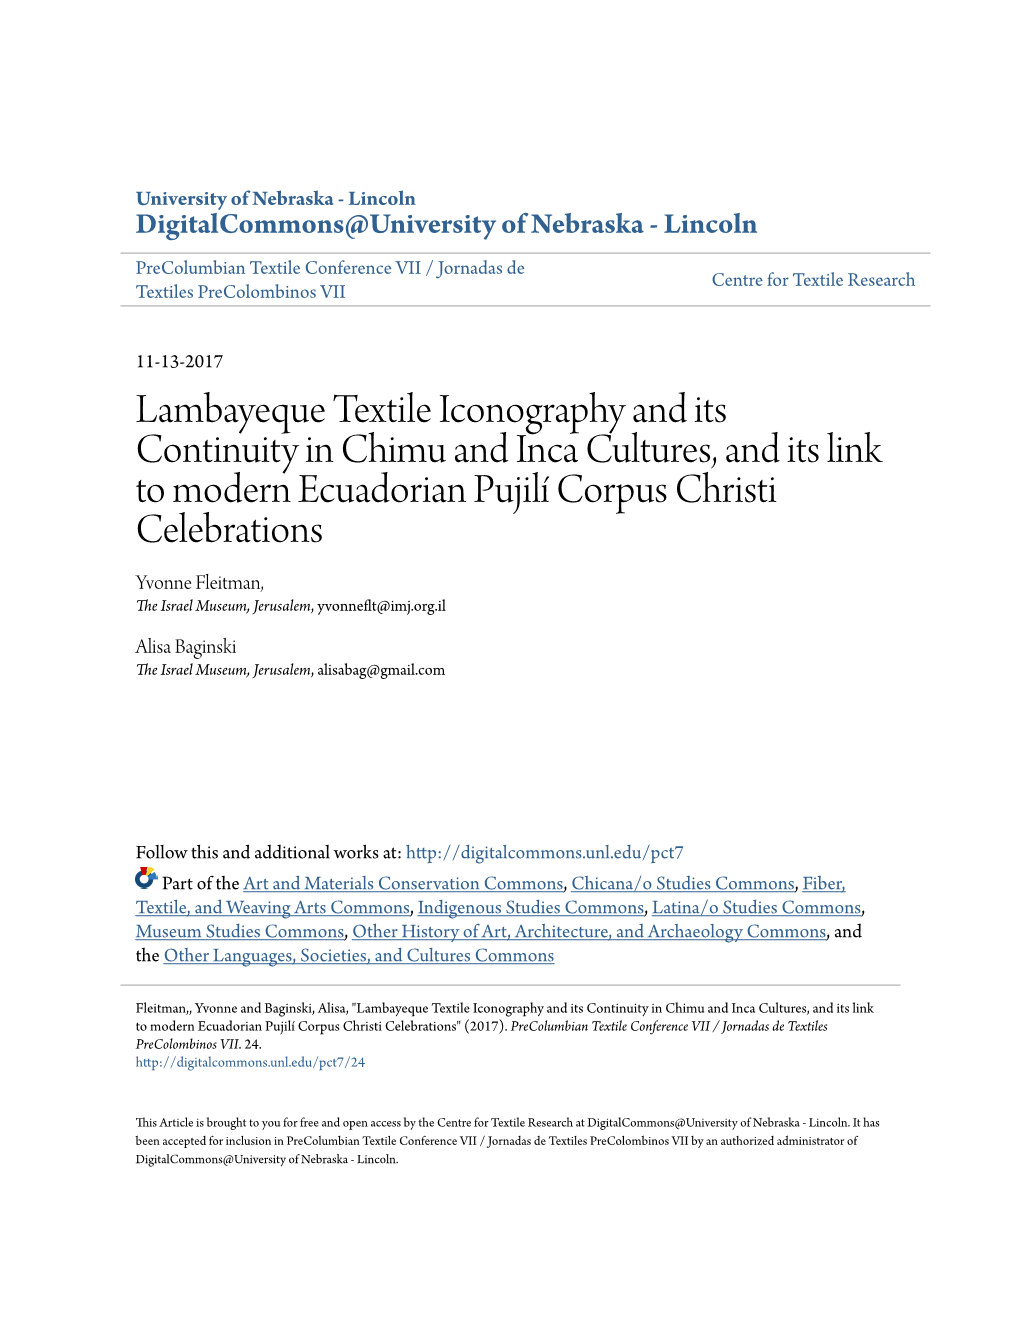 Lambayeque Textile Iconography and Its Continuity in Chimu and Inca